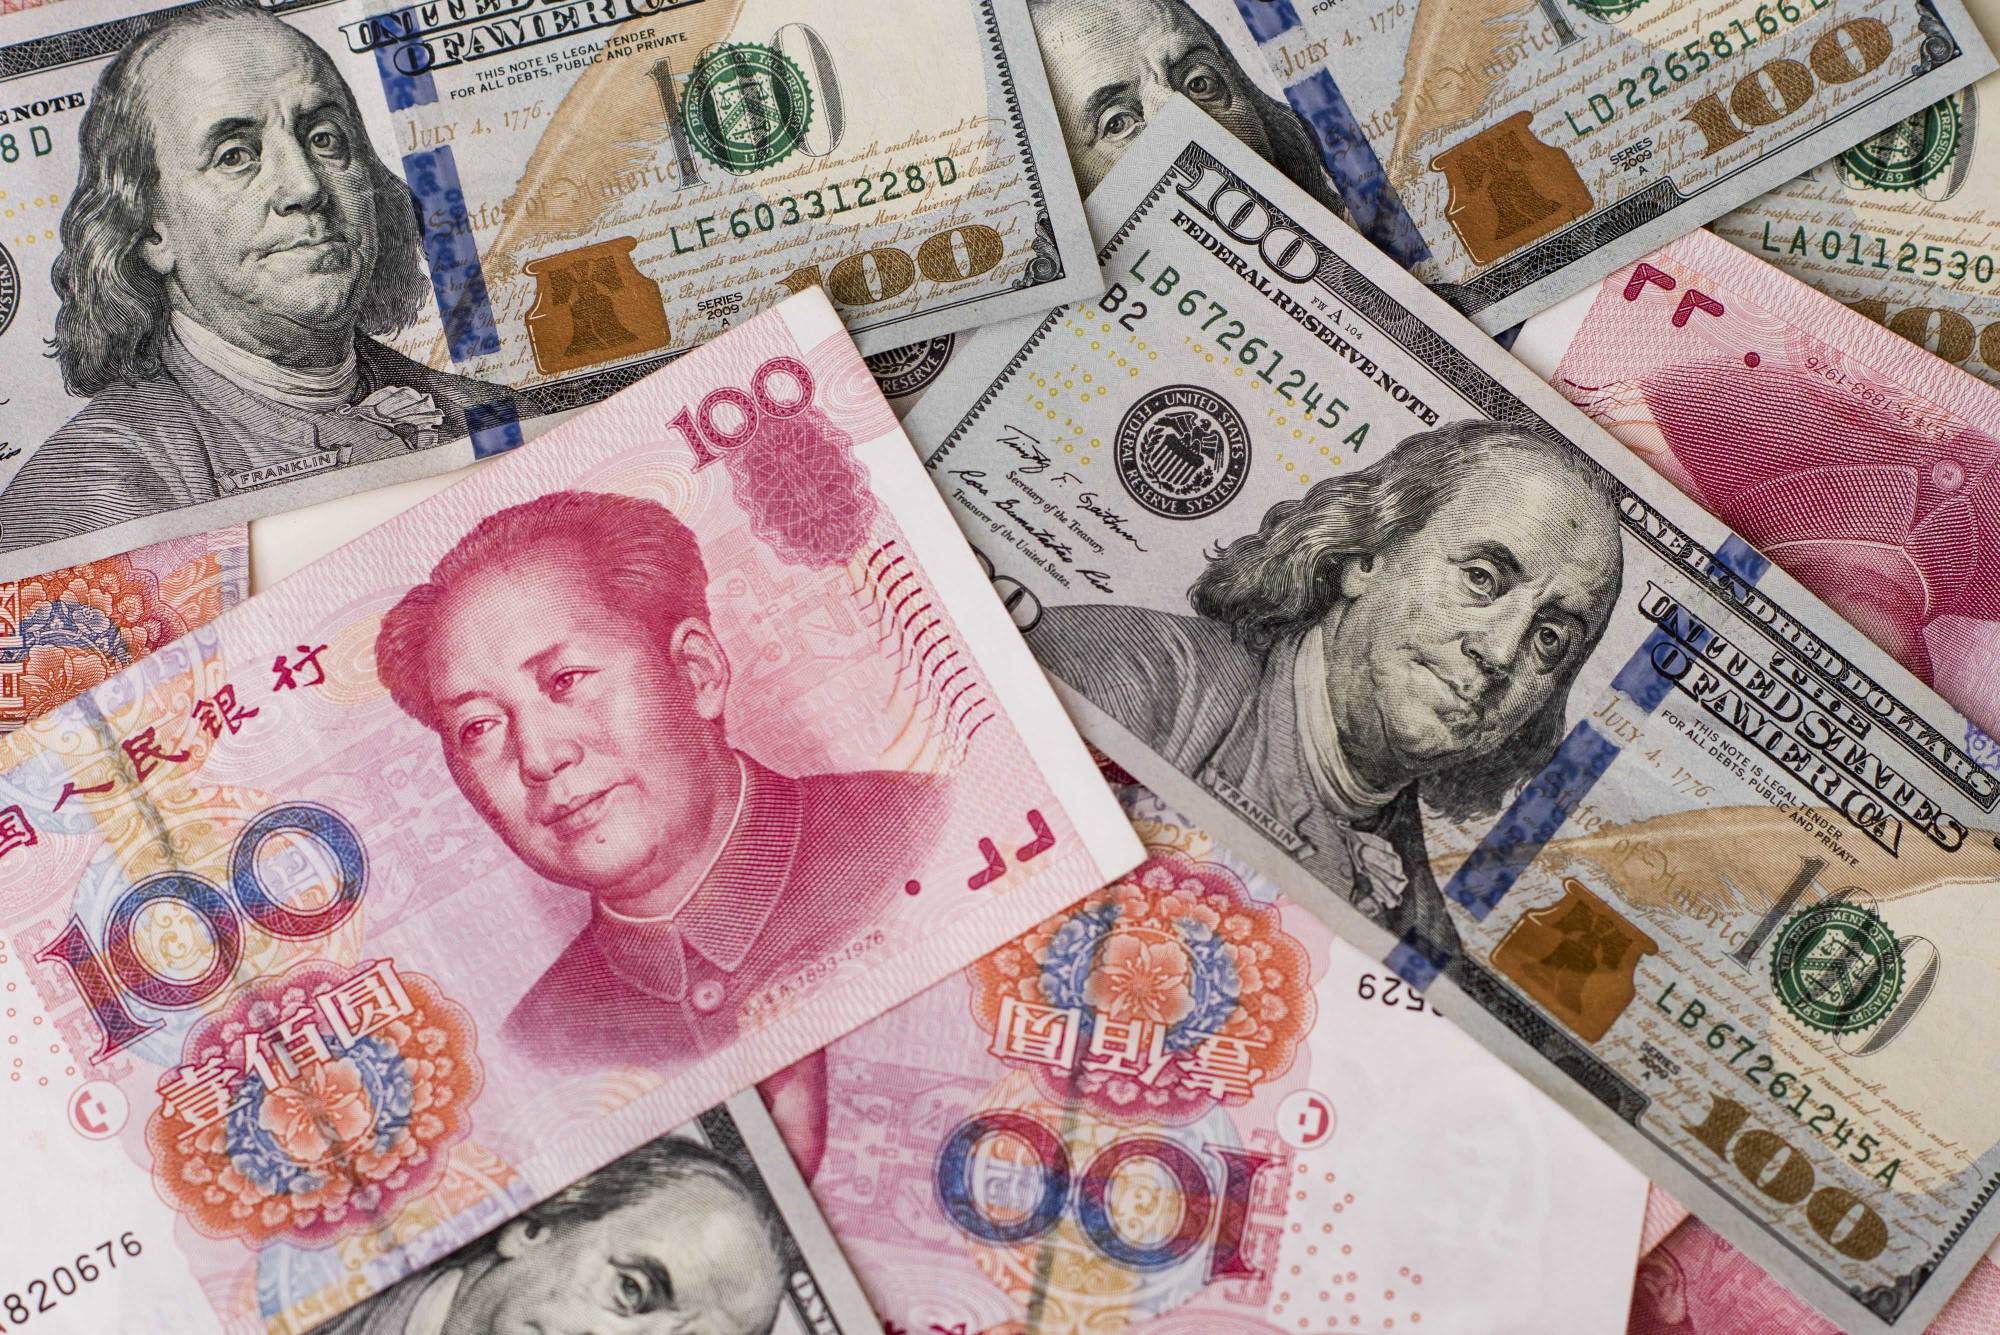 The presumption has been that geopolitics will shape the global financial order in China’s favor. But technology may interfere with the yuan taking on the dollar for international payments. | BLOOMBERG 